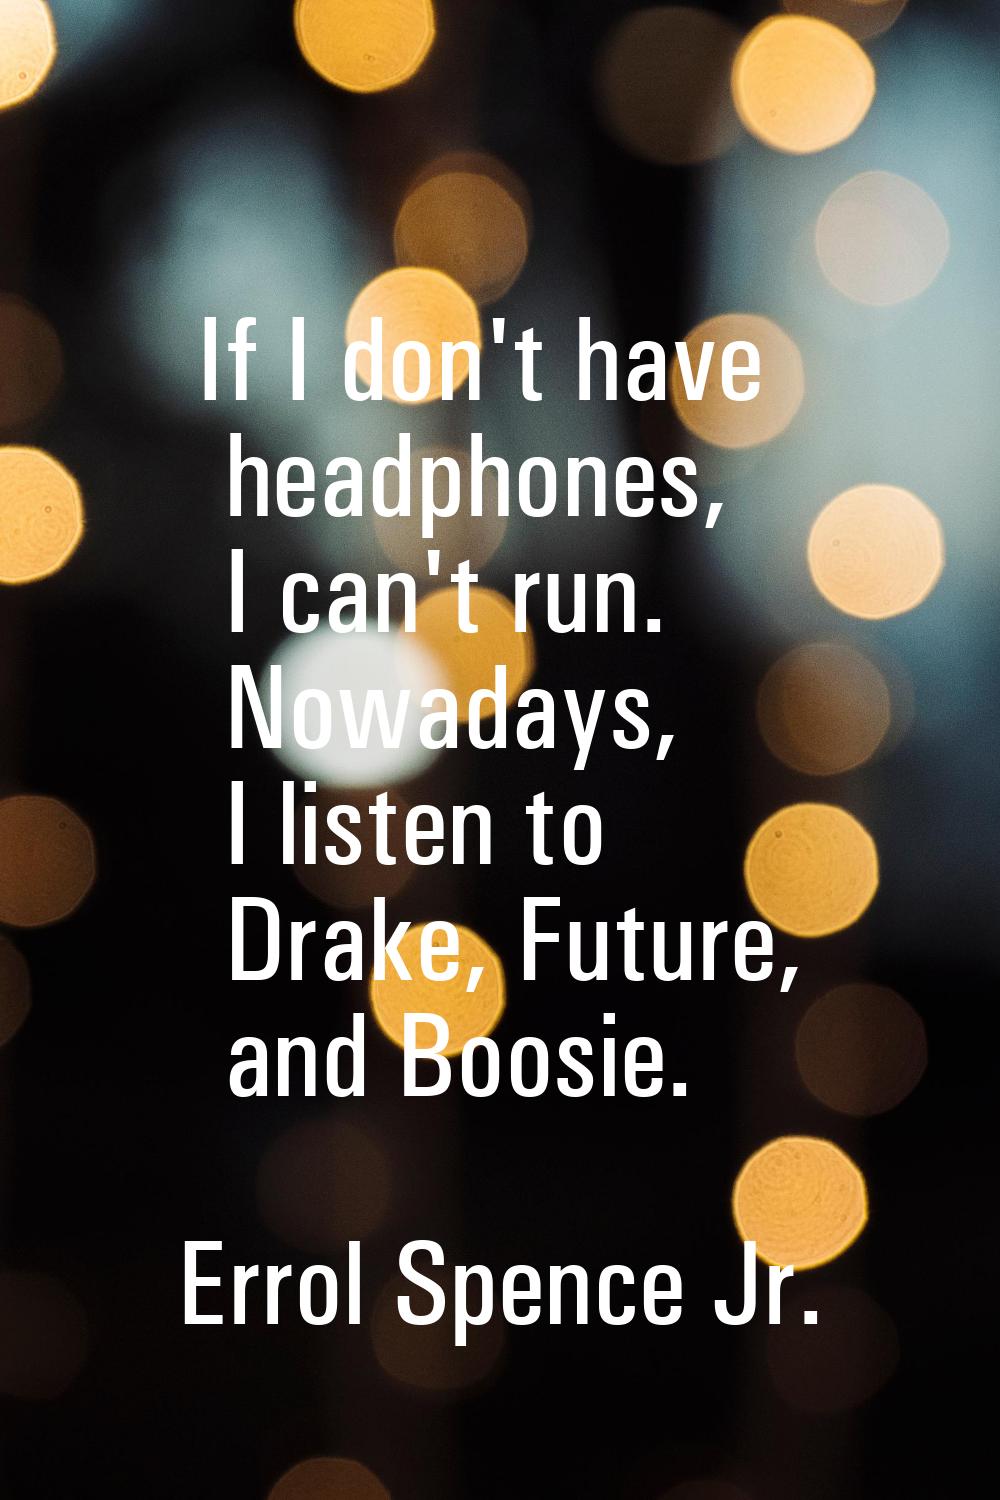 If I don't have headphones, I can't run. Nowadays, I listen to Drake, Future, and Boosie.